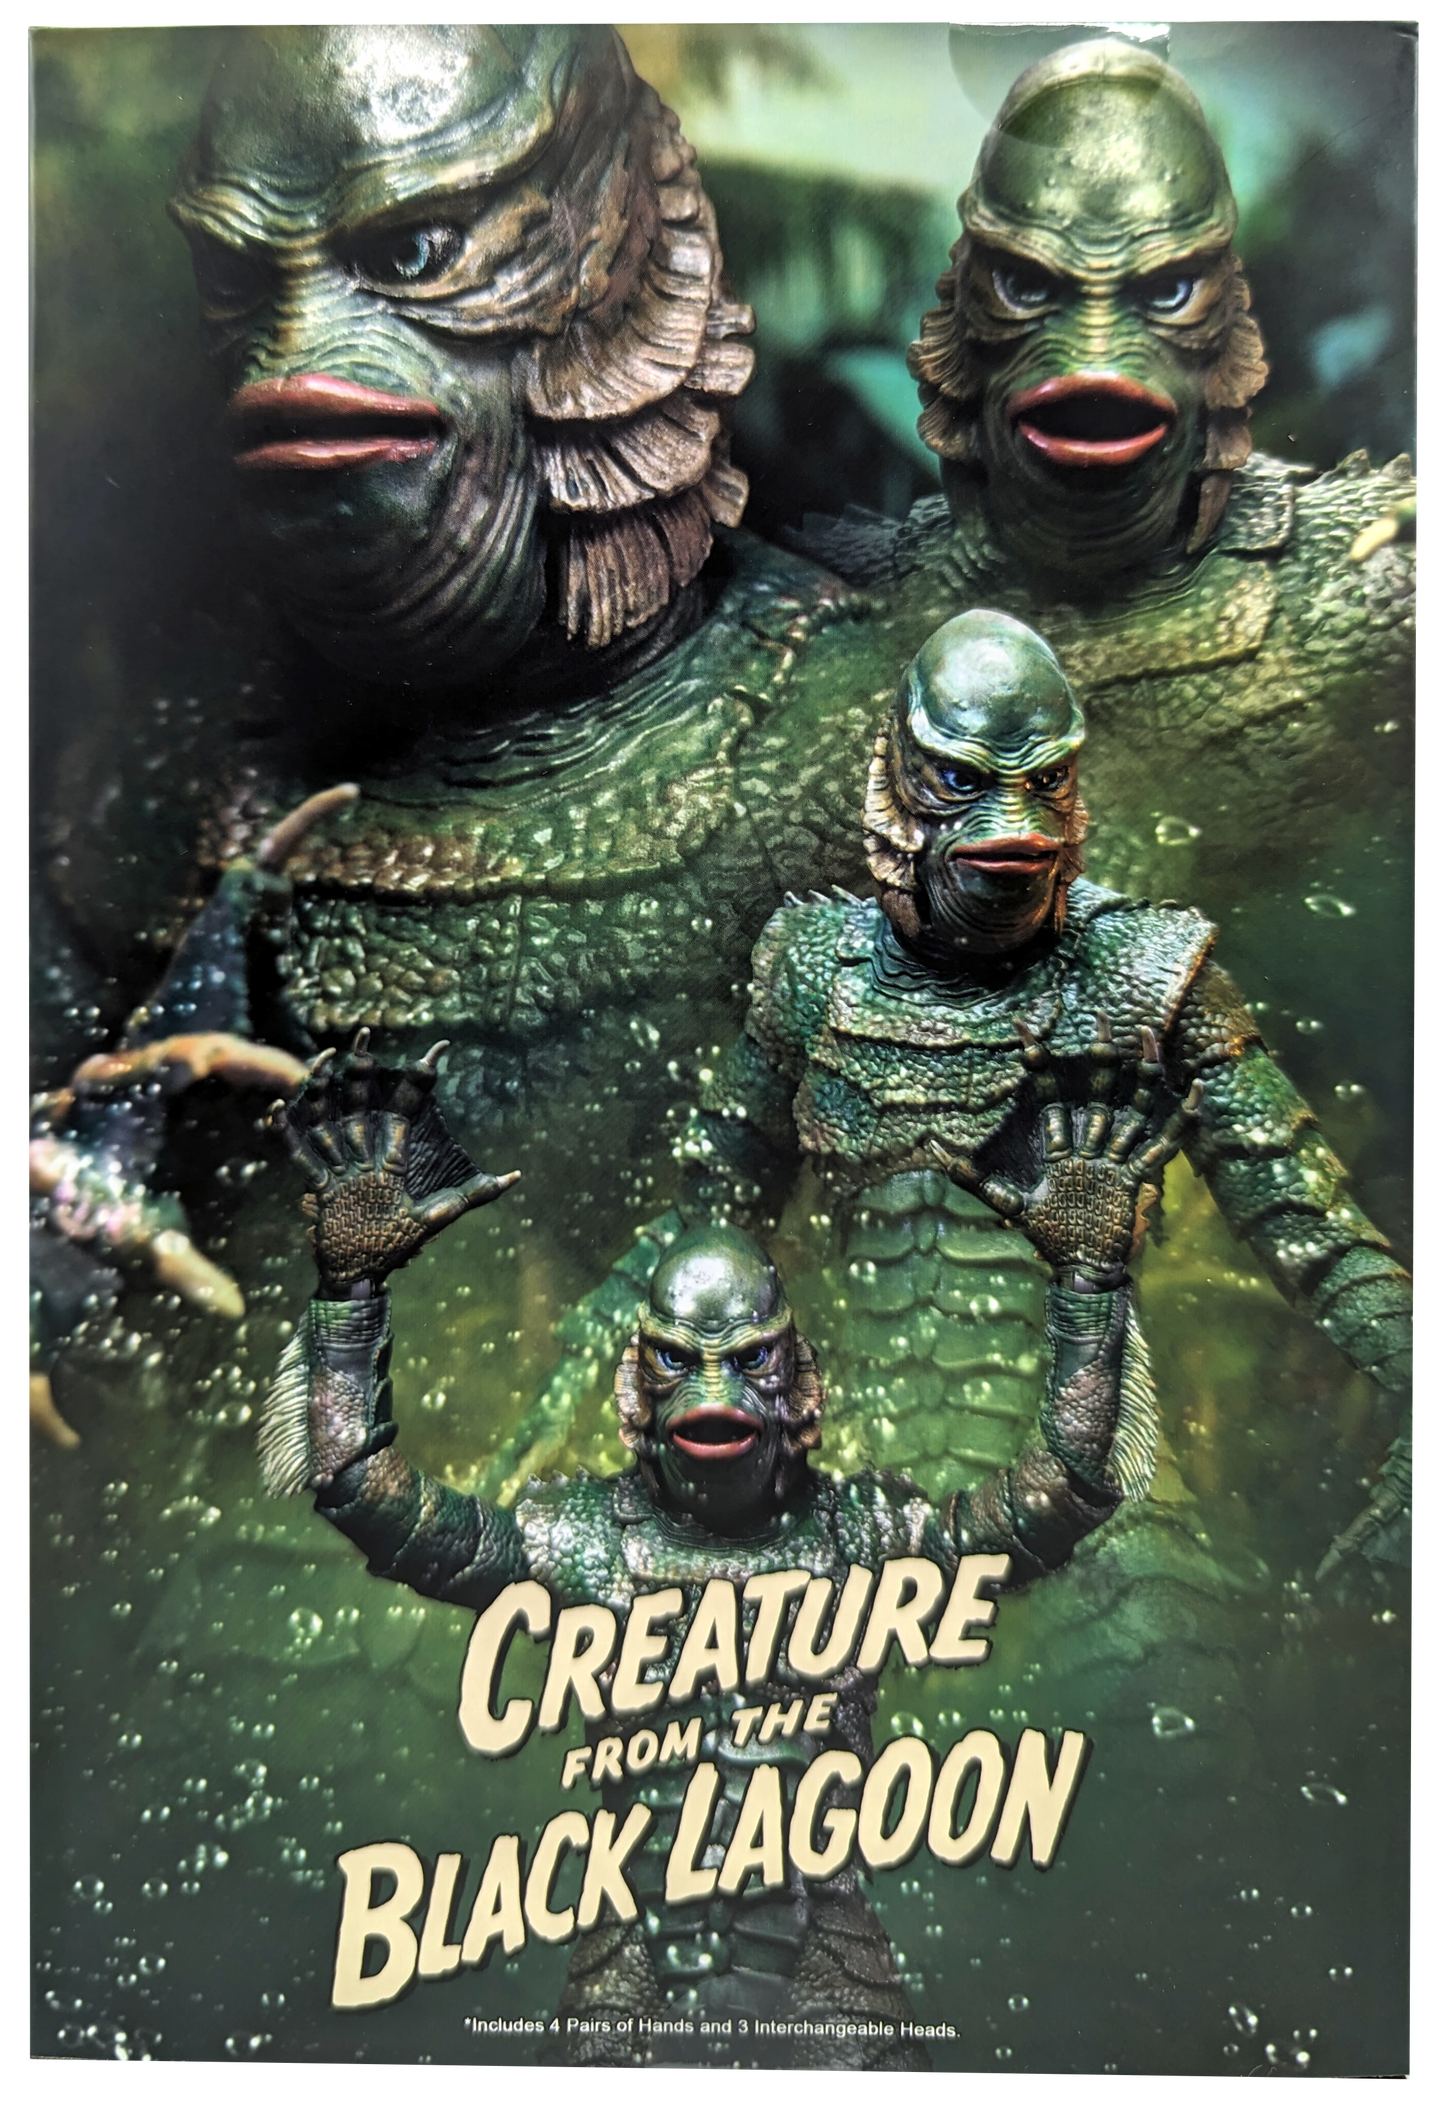 N.E.C.A - Universal Monsters  7” Scale Action Figure – Ultimate Creature from the Black Lagoon (Color)